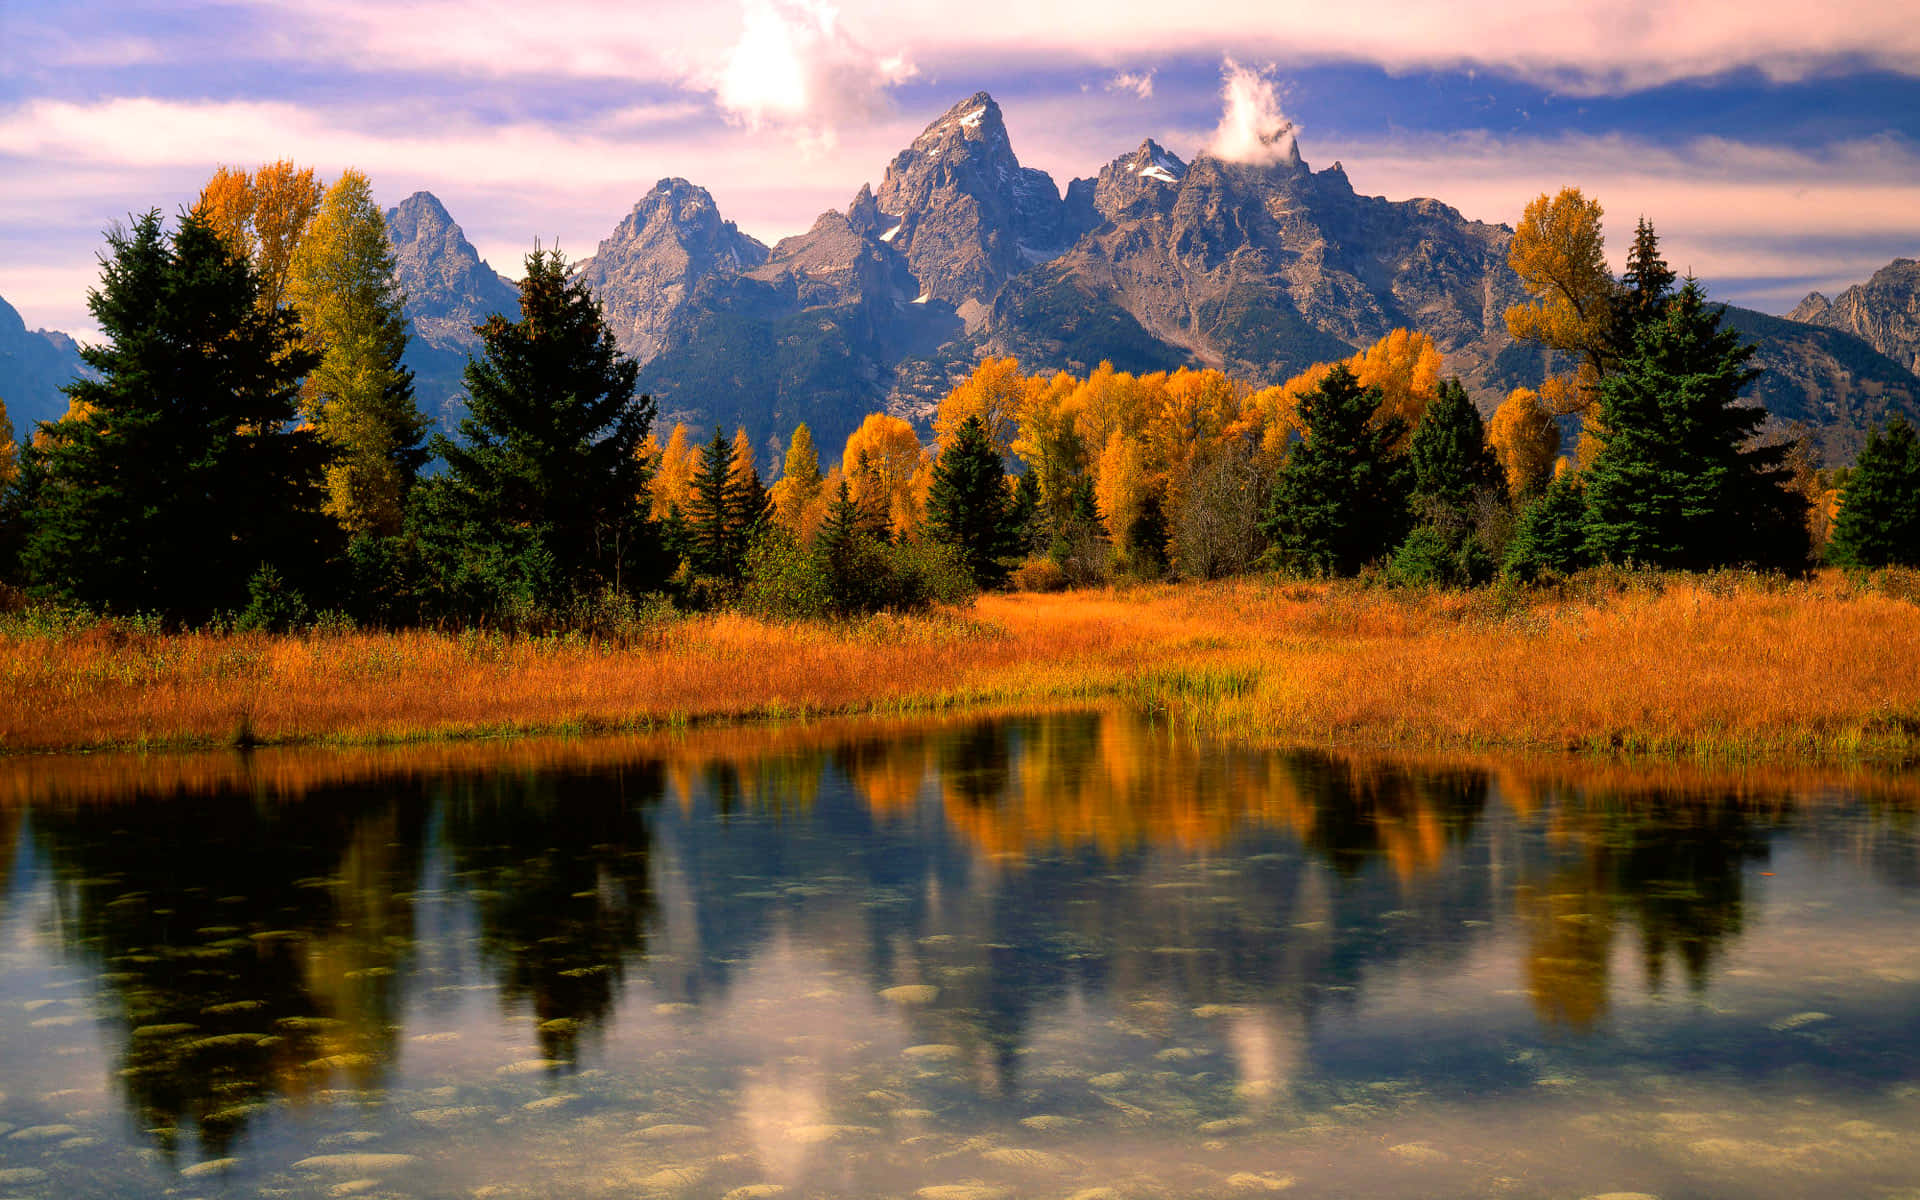 A Stunning Fall Landscape of Colorful Mountains Wallpaper